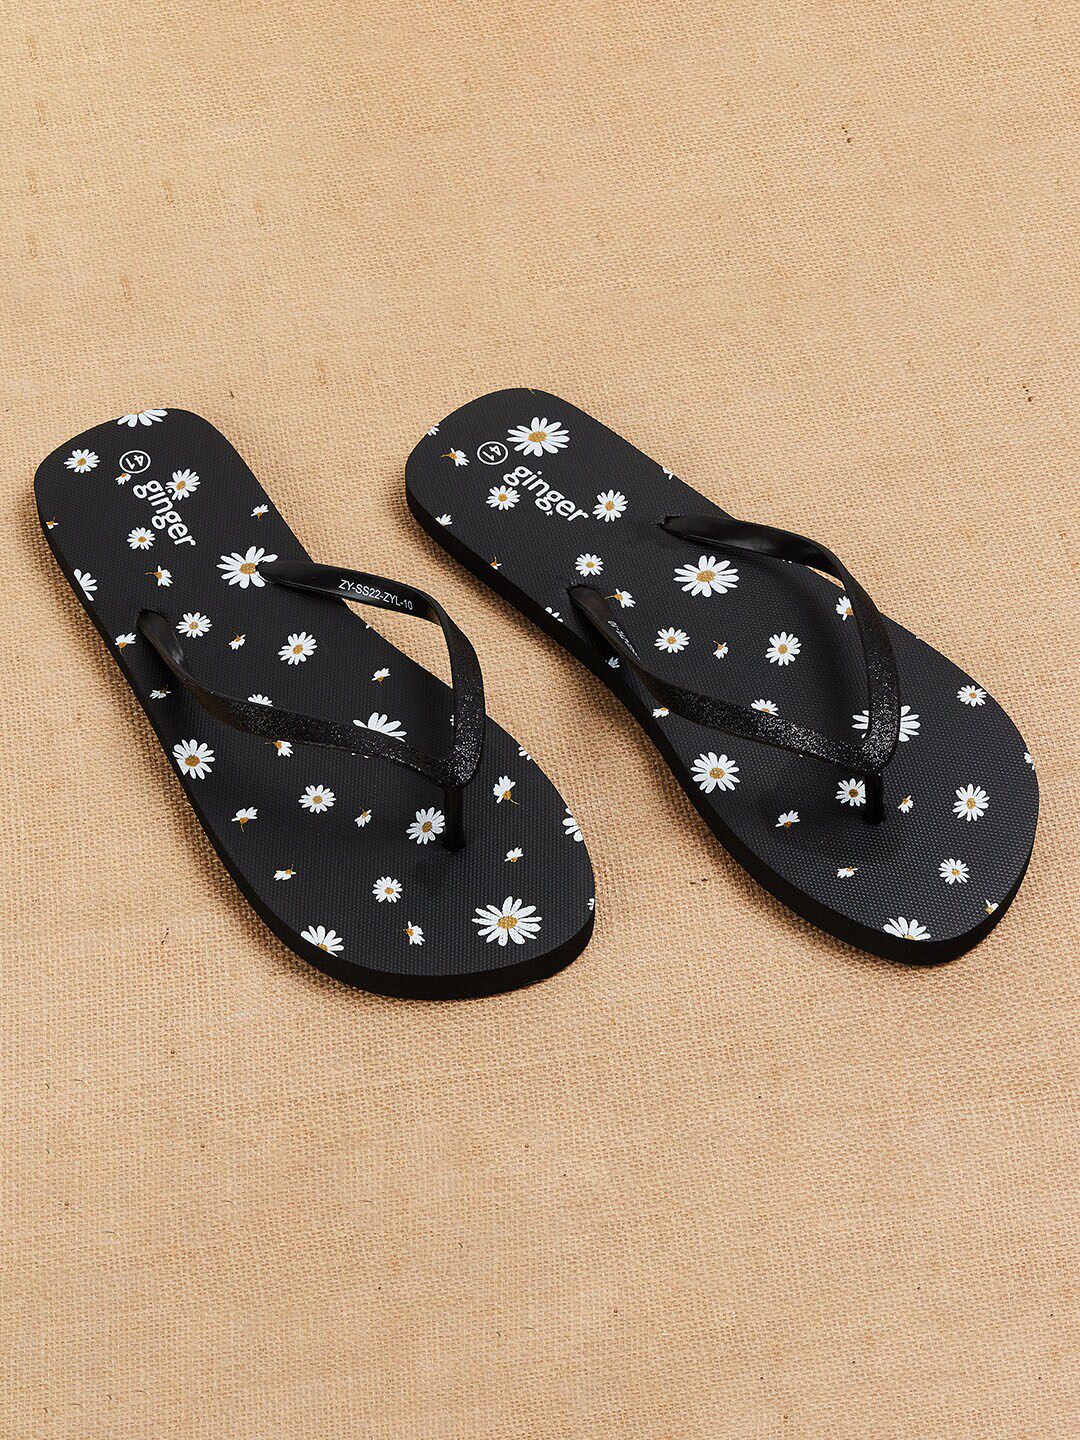 Ginger by Lifestyle Women Black & White Printed Rubber Thong Flip-Flops Price in India